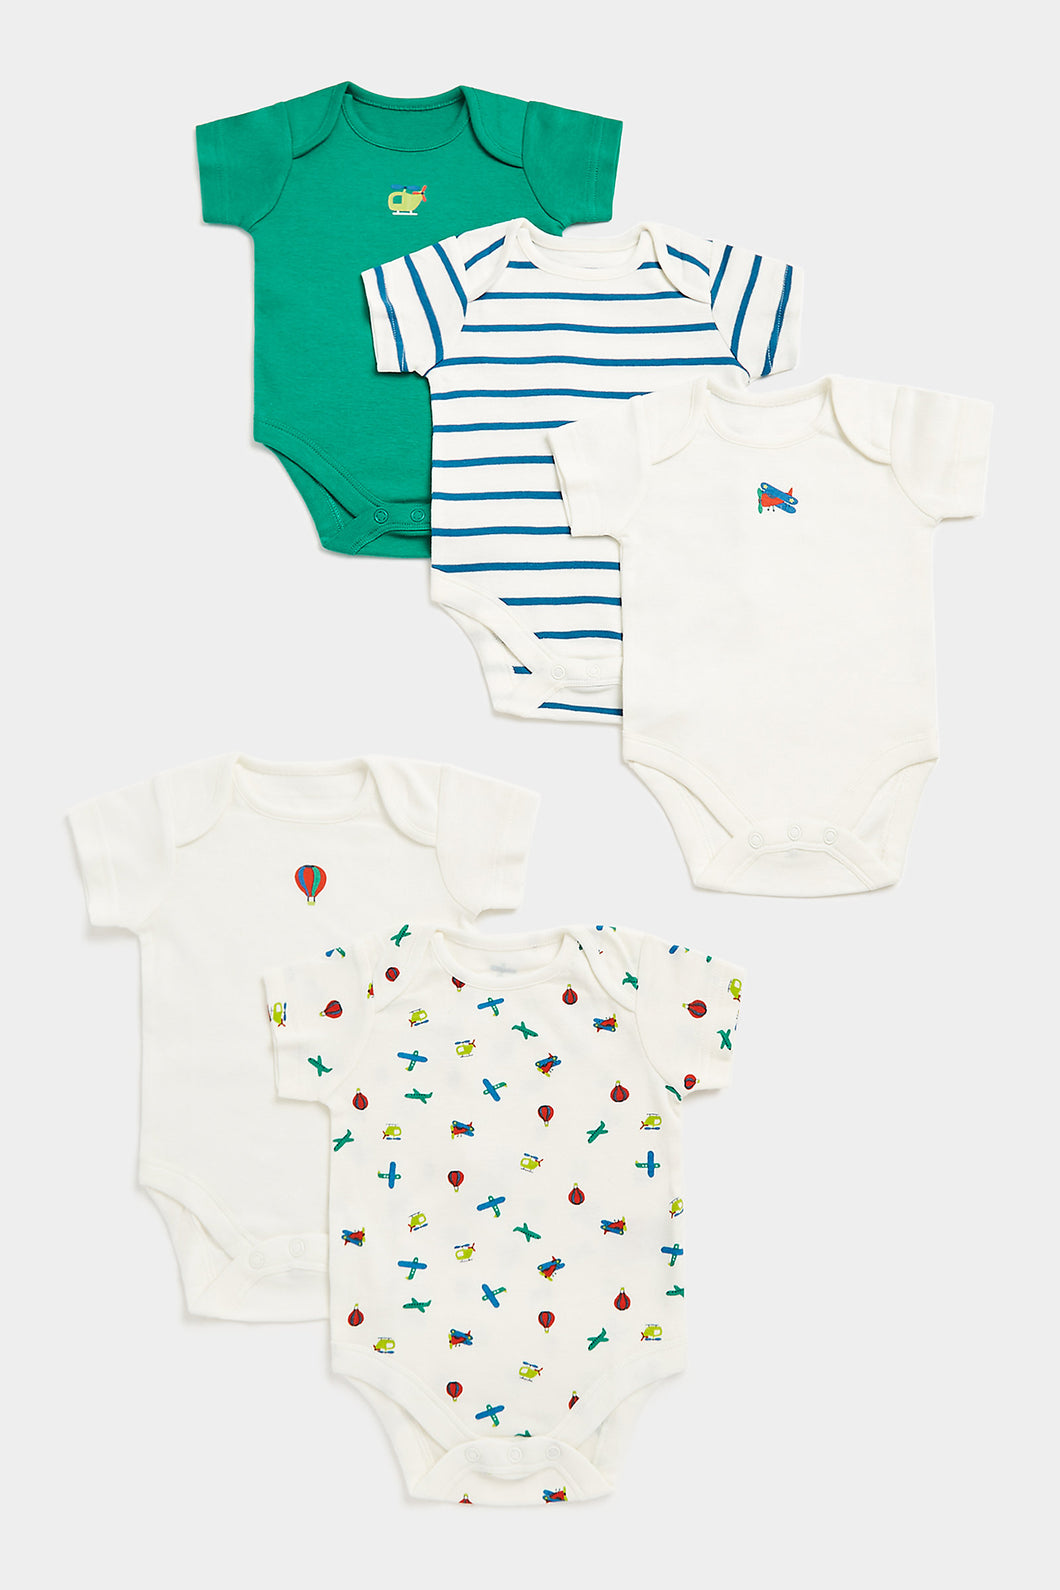 Mothercare Planes Short-Sleeved Bodysuits - 5 Pack